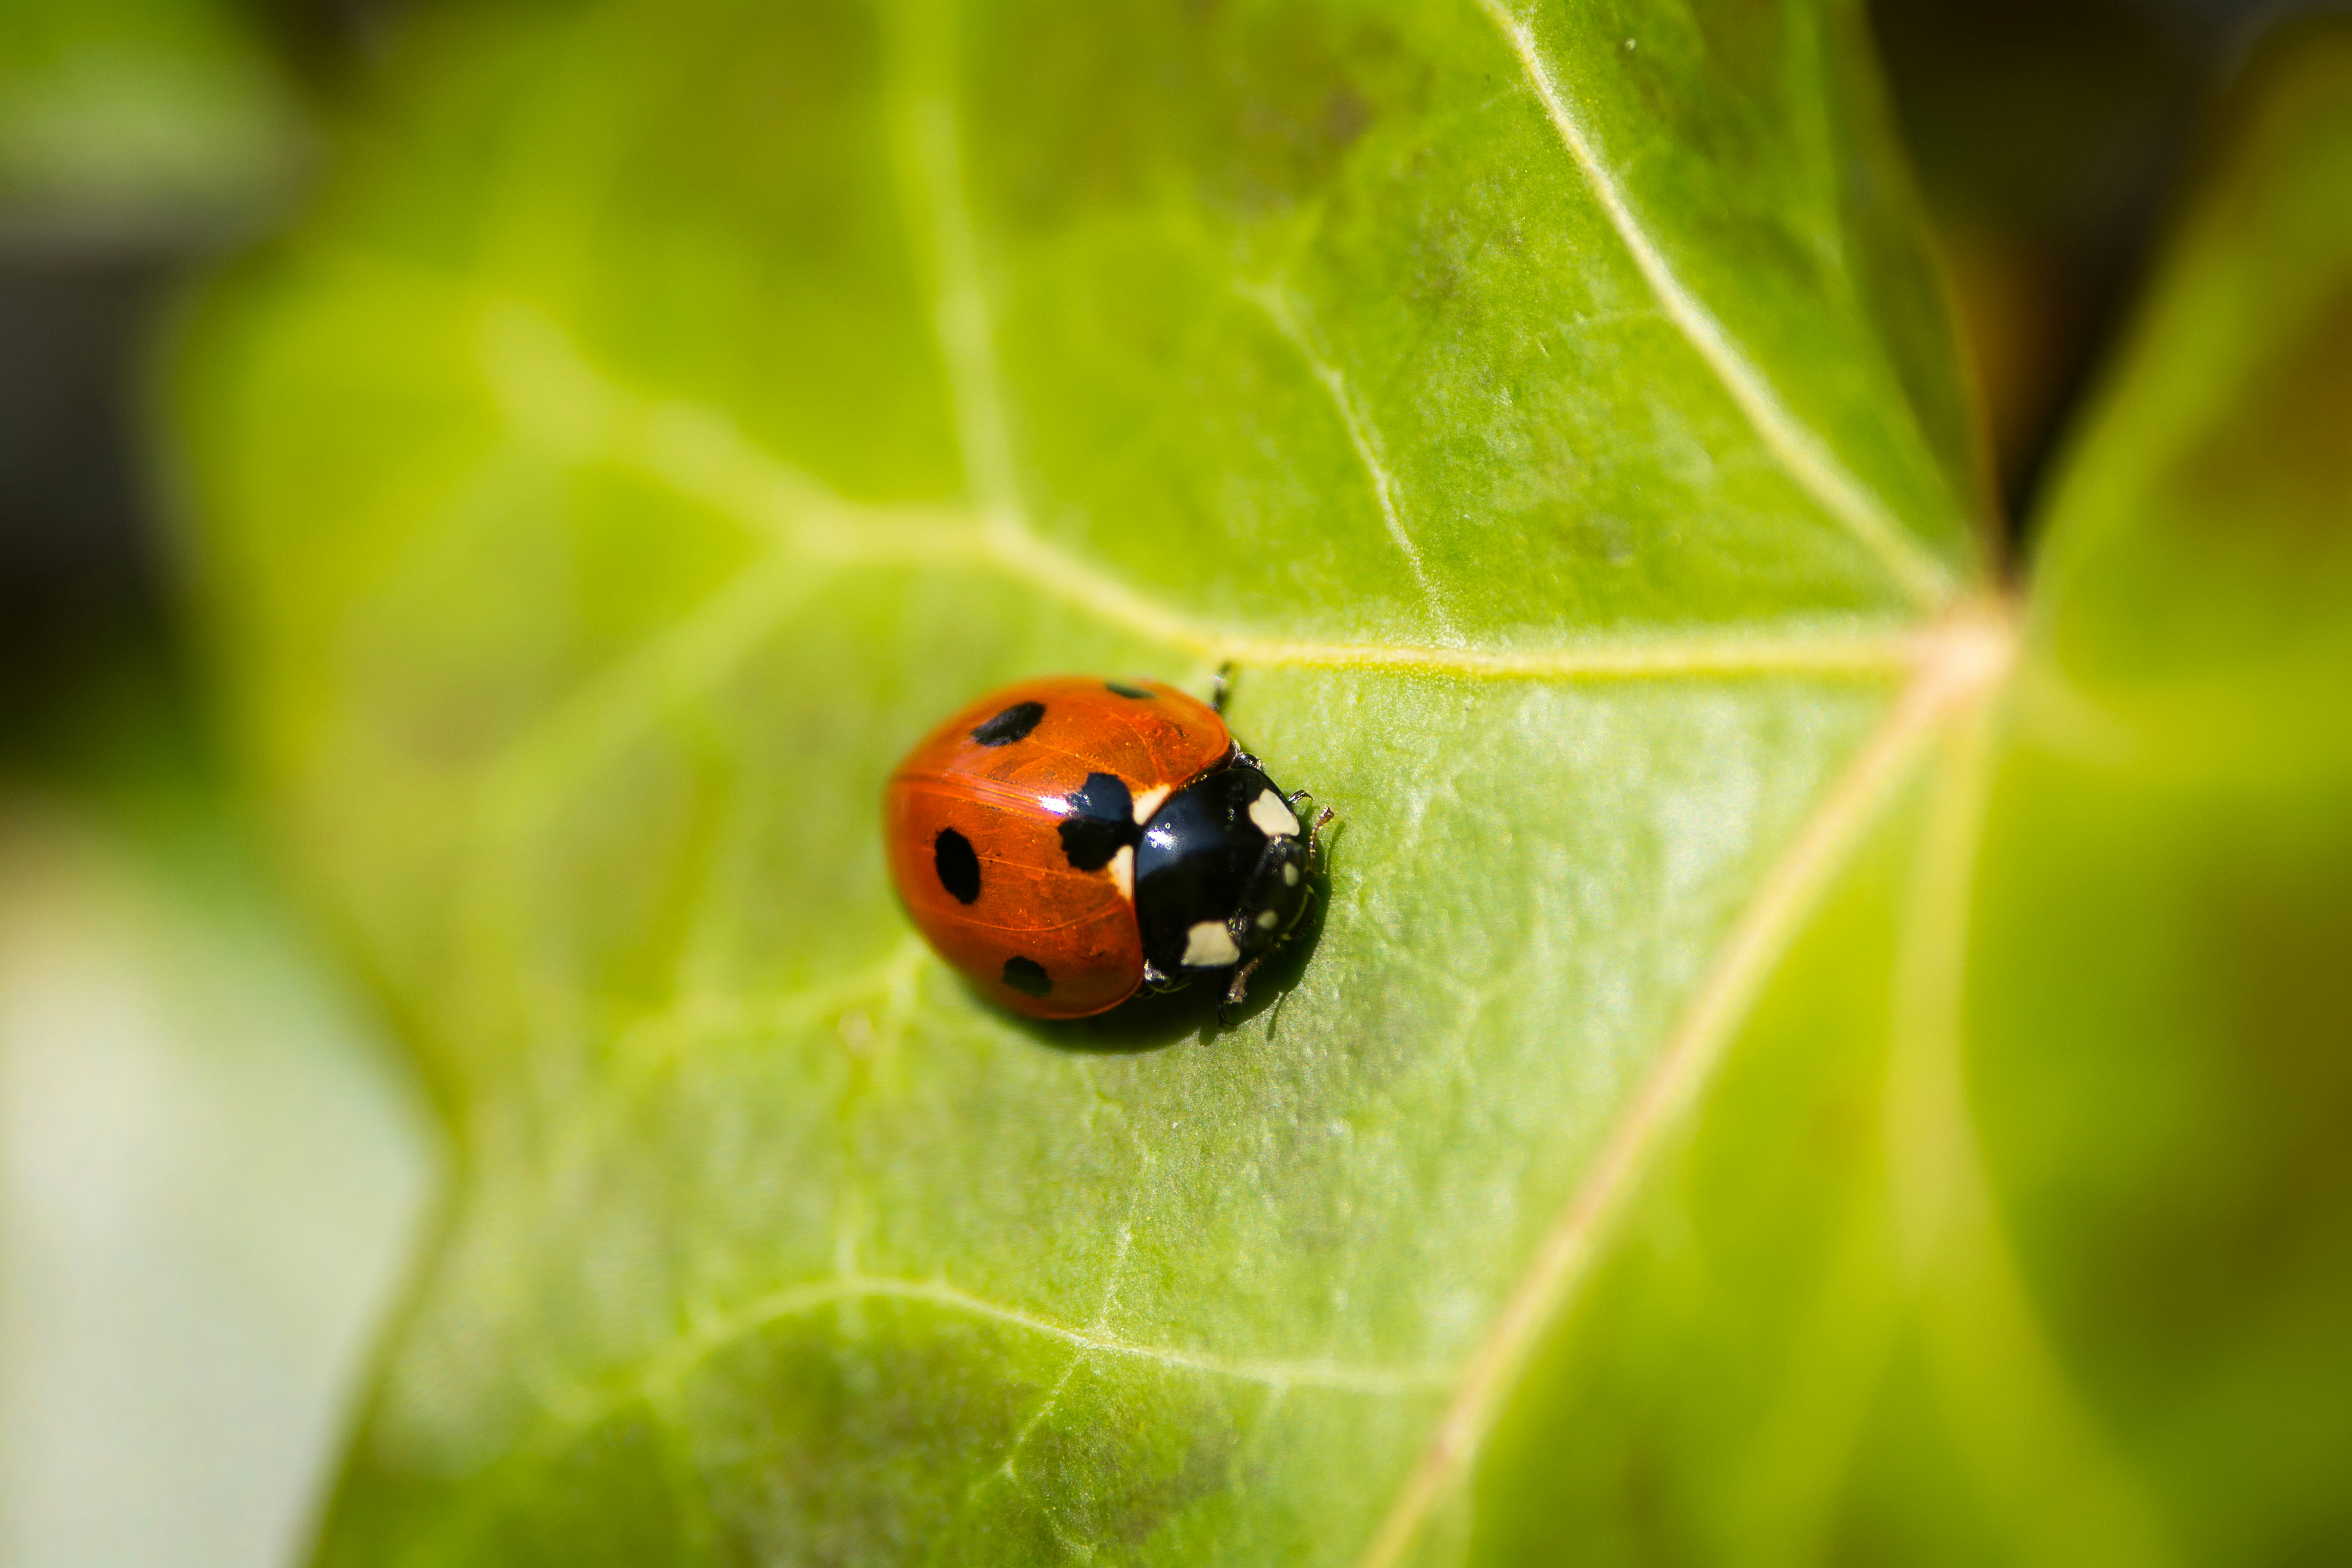 red lady bug on leaf in macro photography